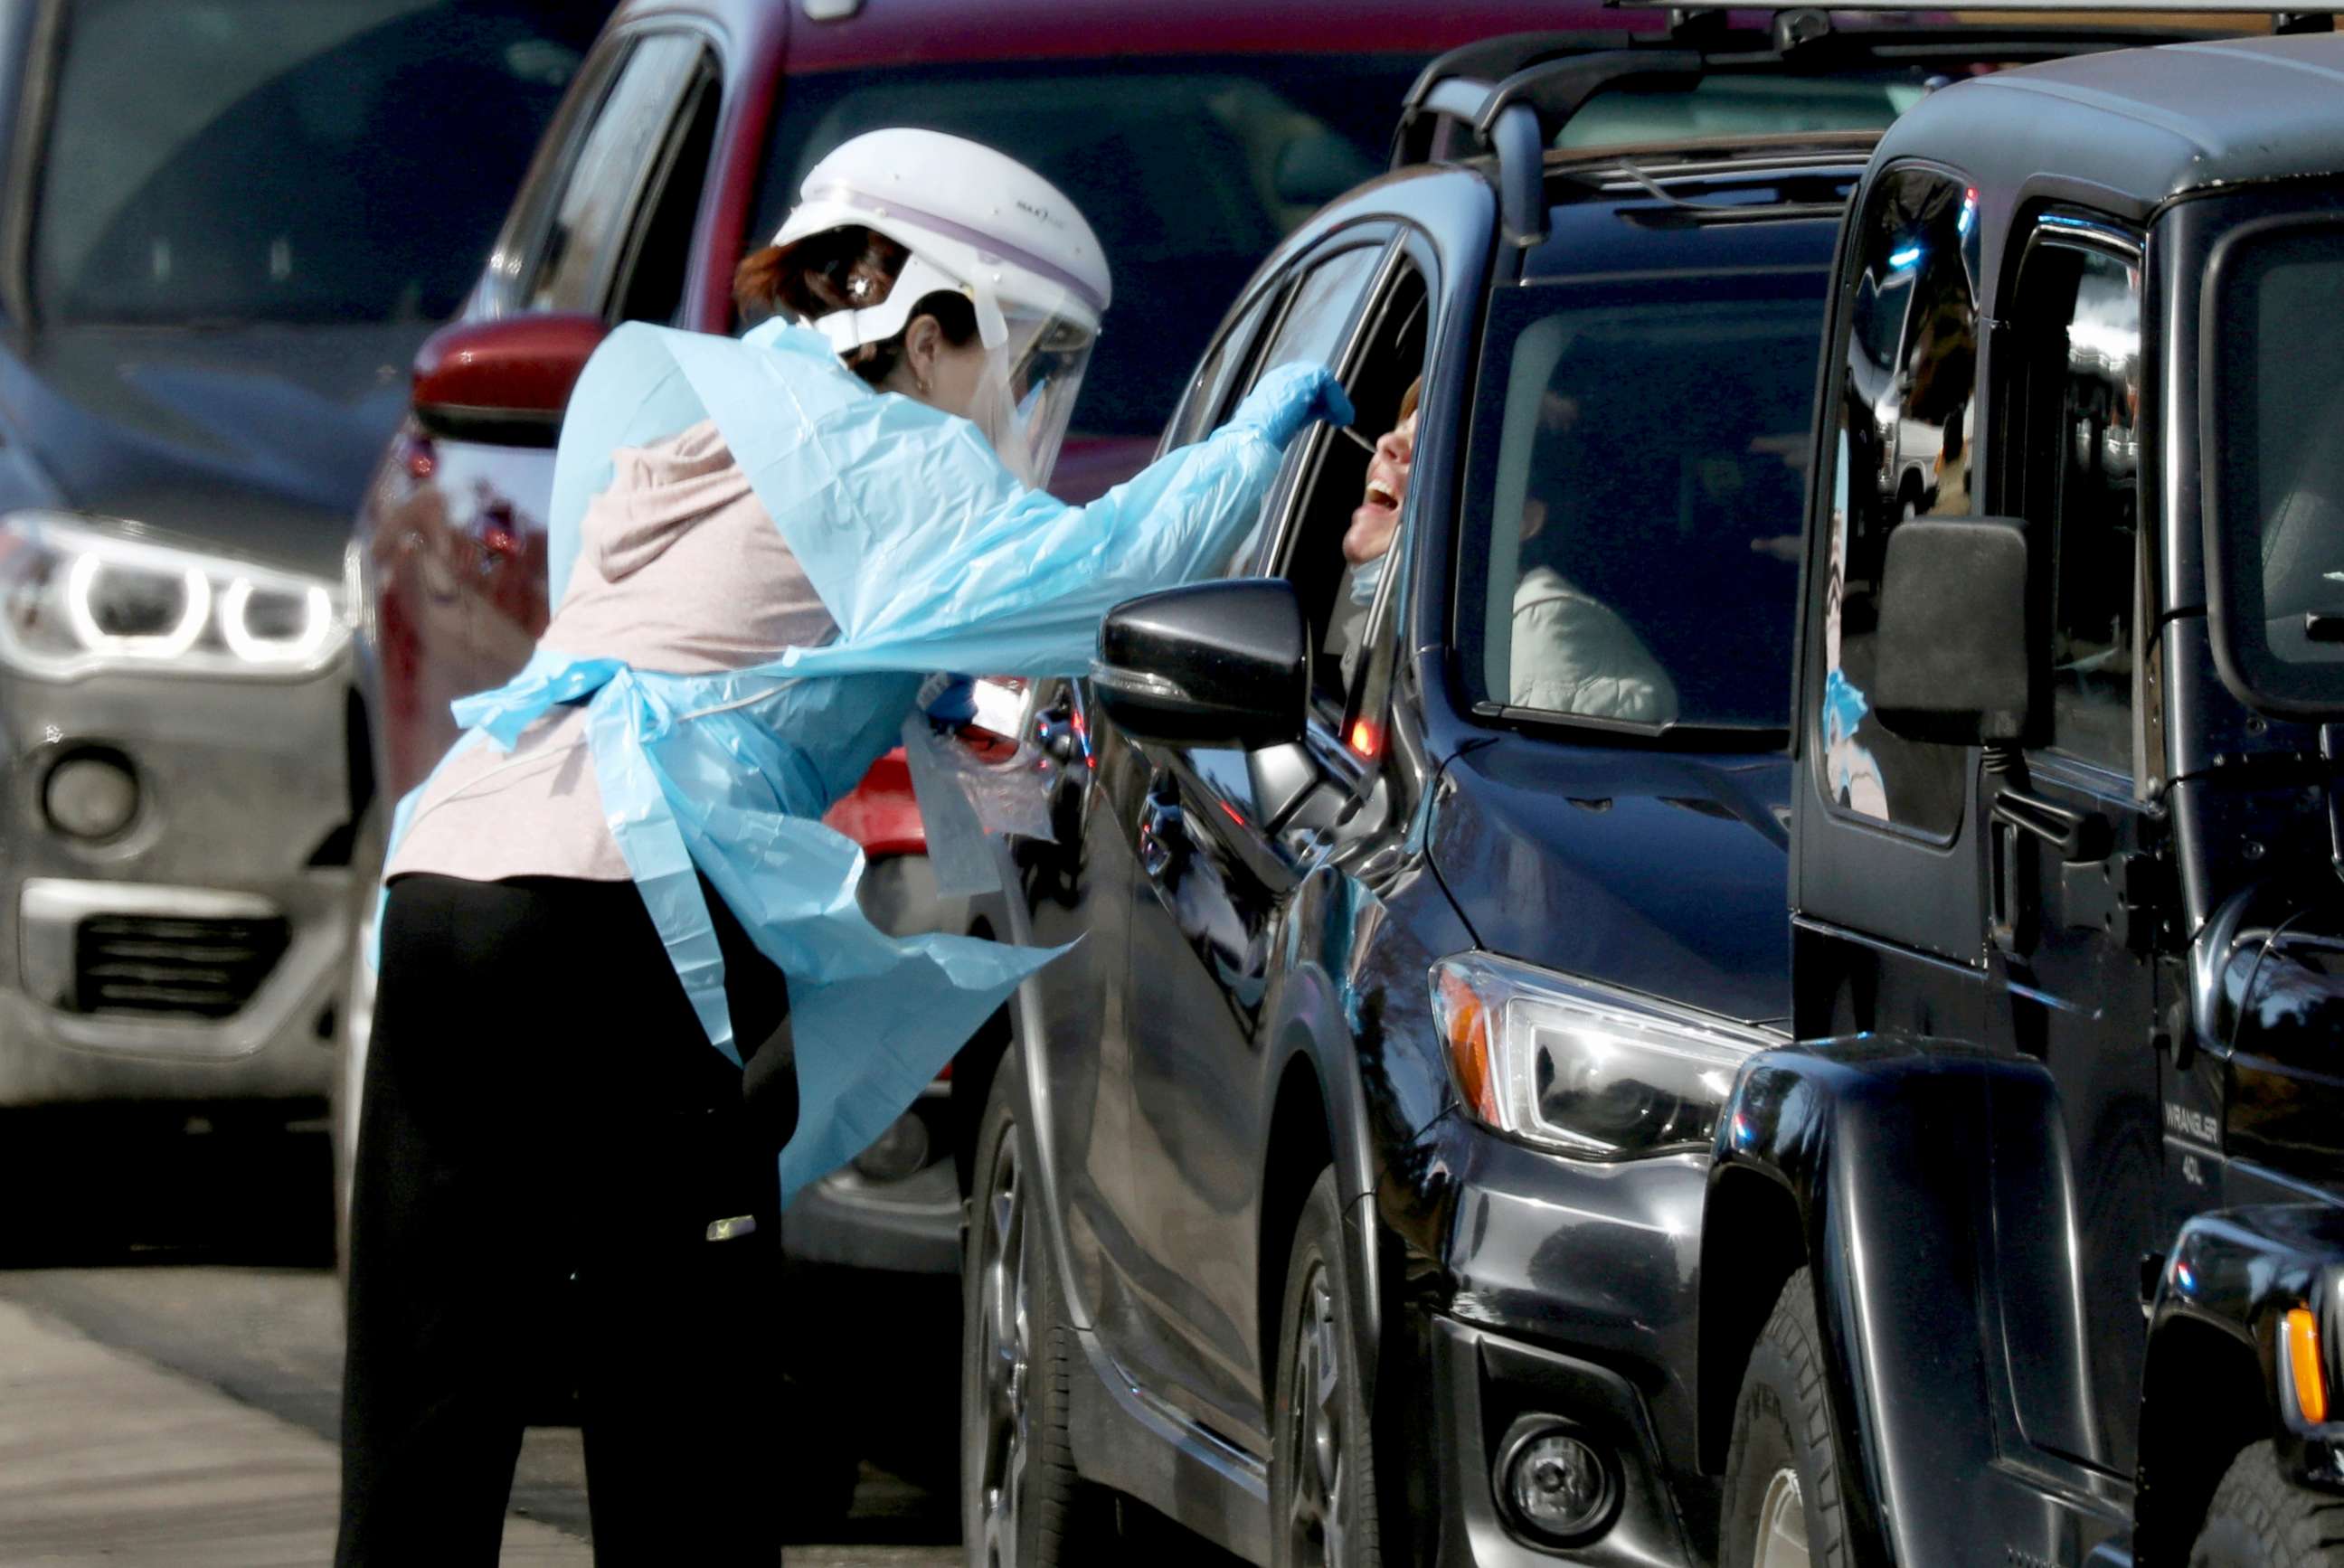 PHOTO: Health care worker tests people at a drive-thru testing station run by the state health department, for people who suspect they have novel coronavirus, in Denver, Colorado, March 11, 2020.